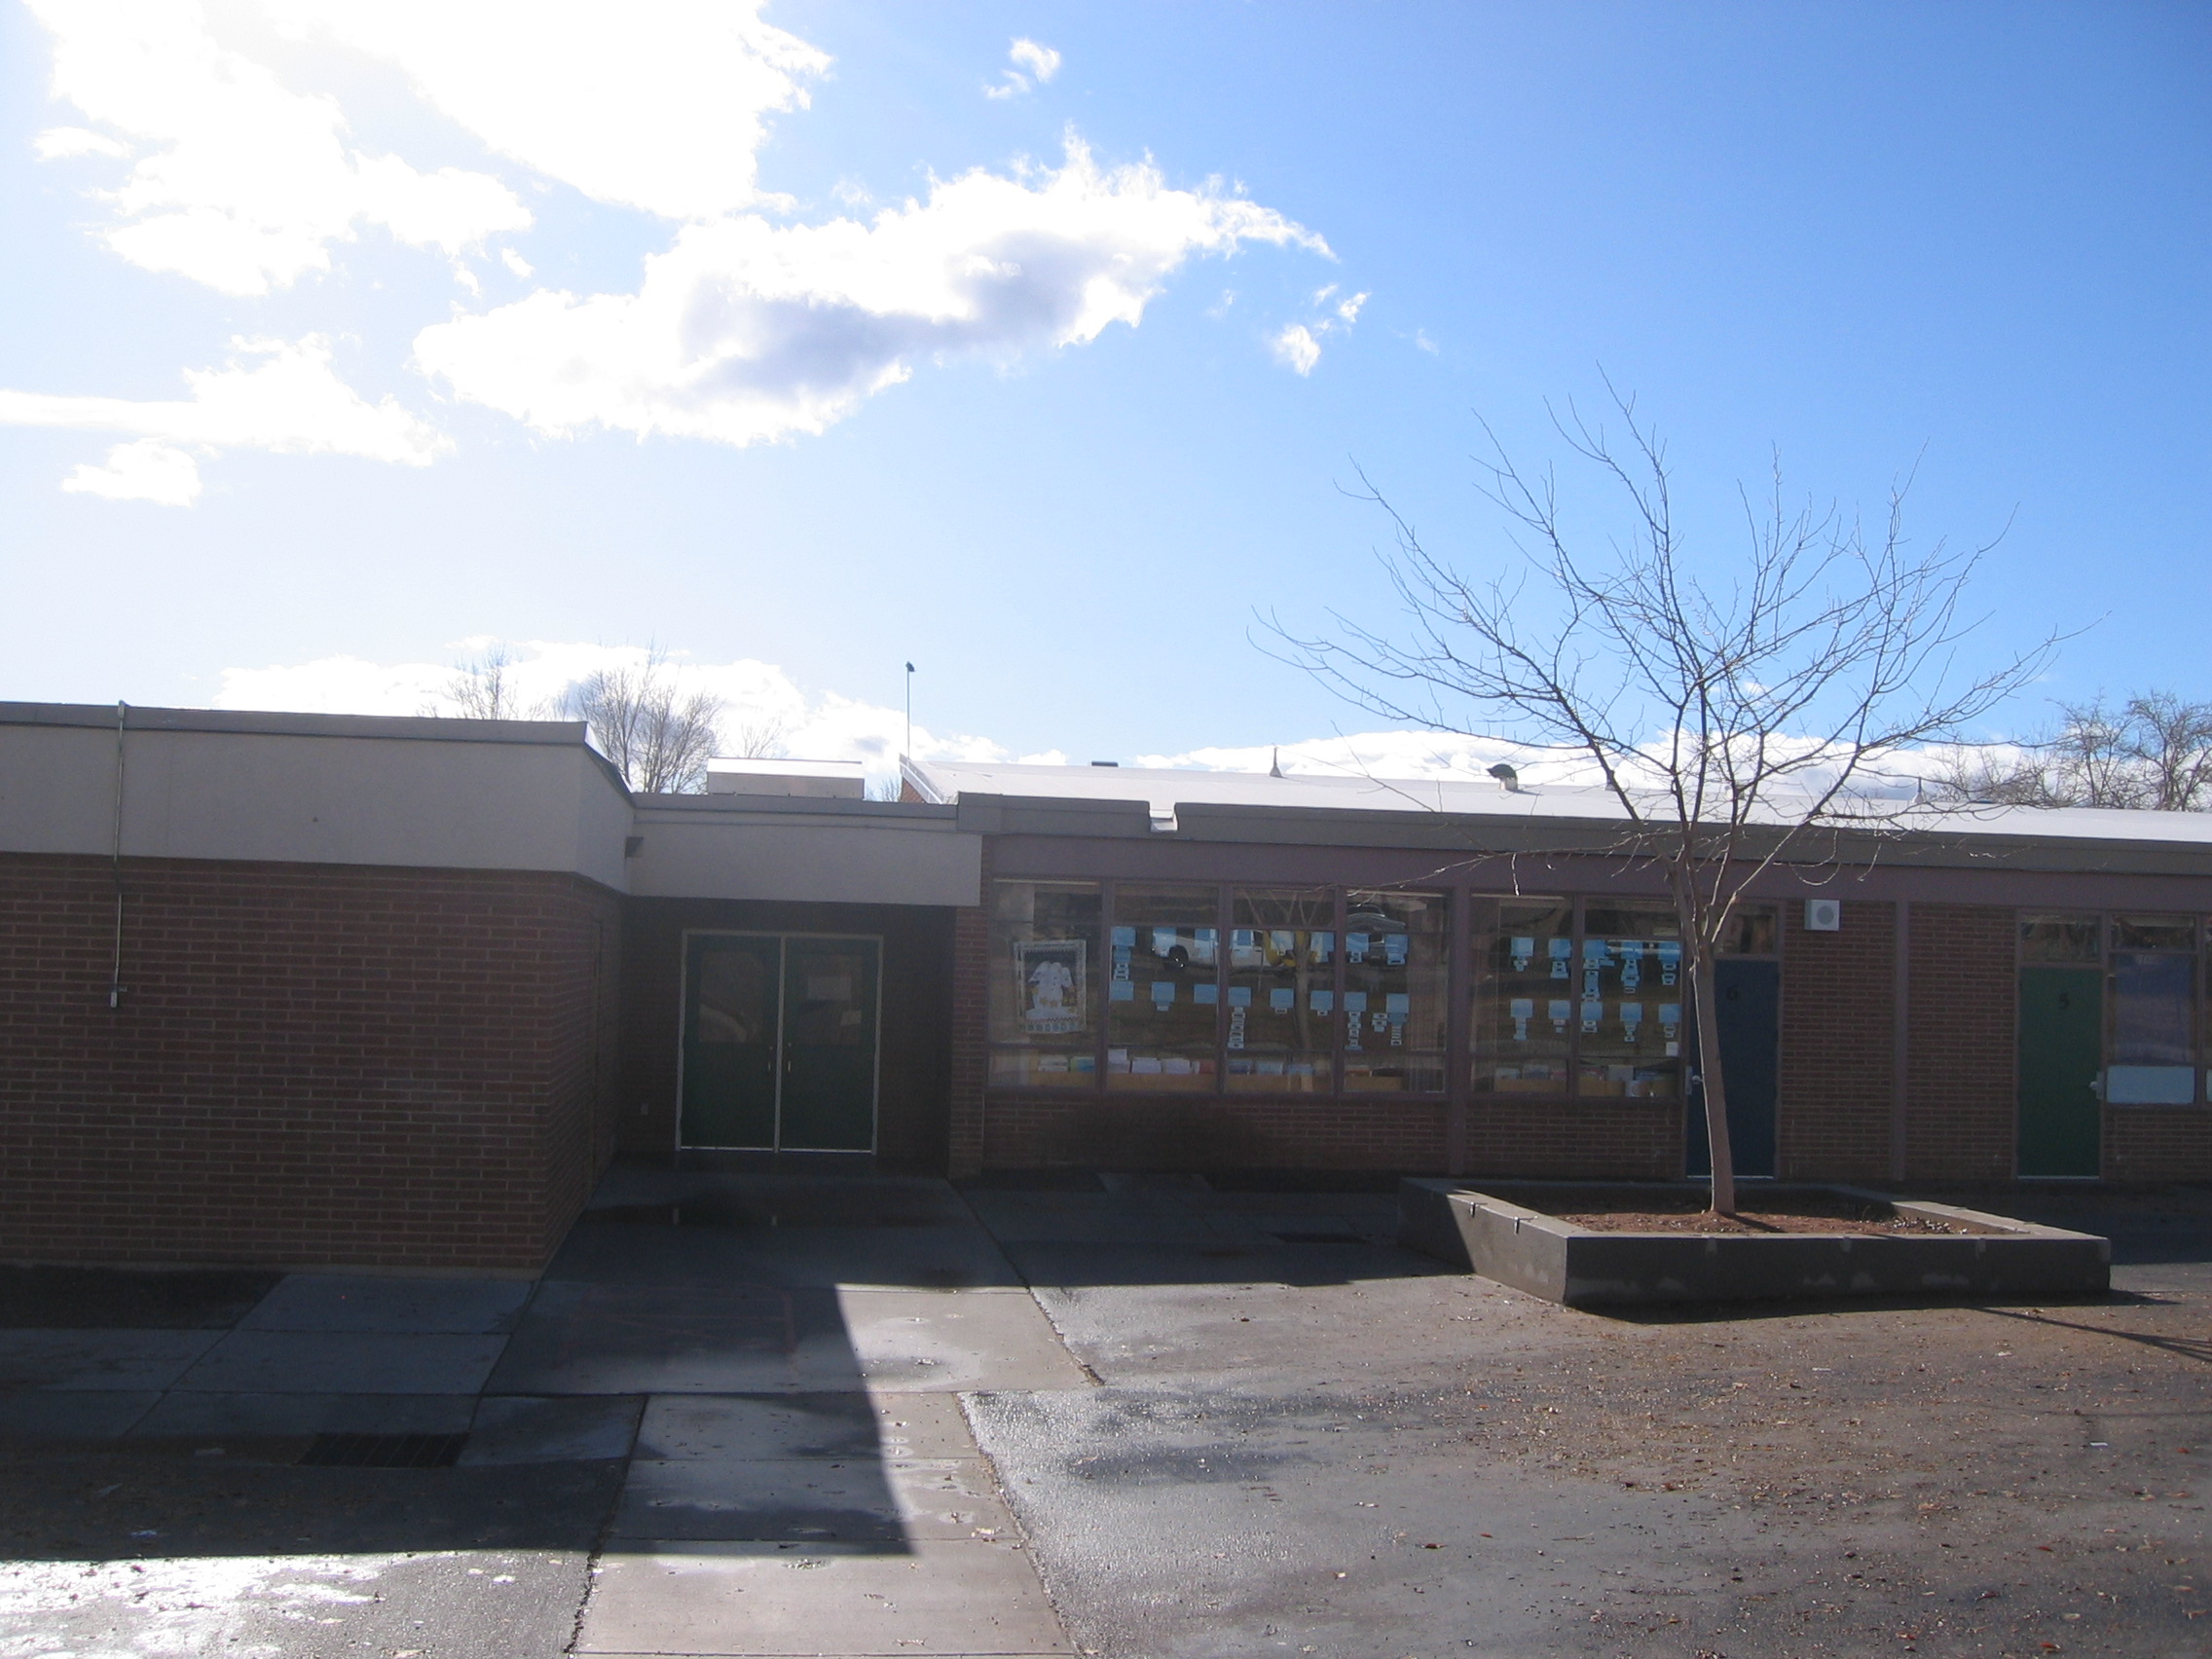 North entrance at East Elementary School